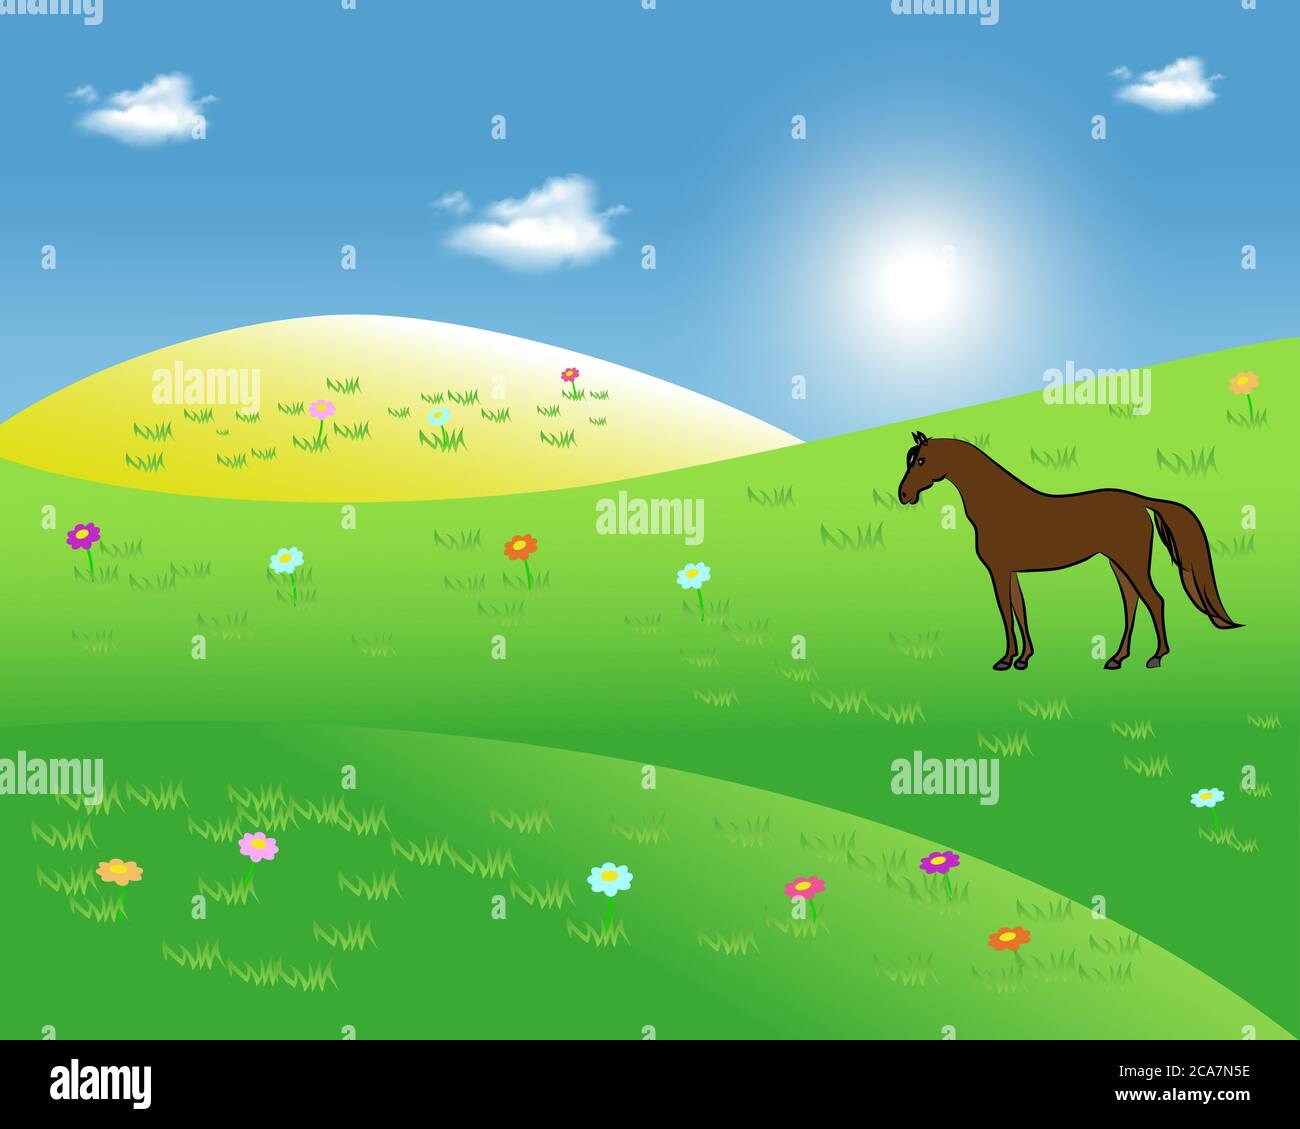 Landscape with horses and clouds. Horse silhouette on grassland in the rolling hills illustration in the flat style. Stock Vector